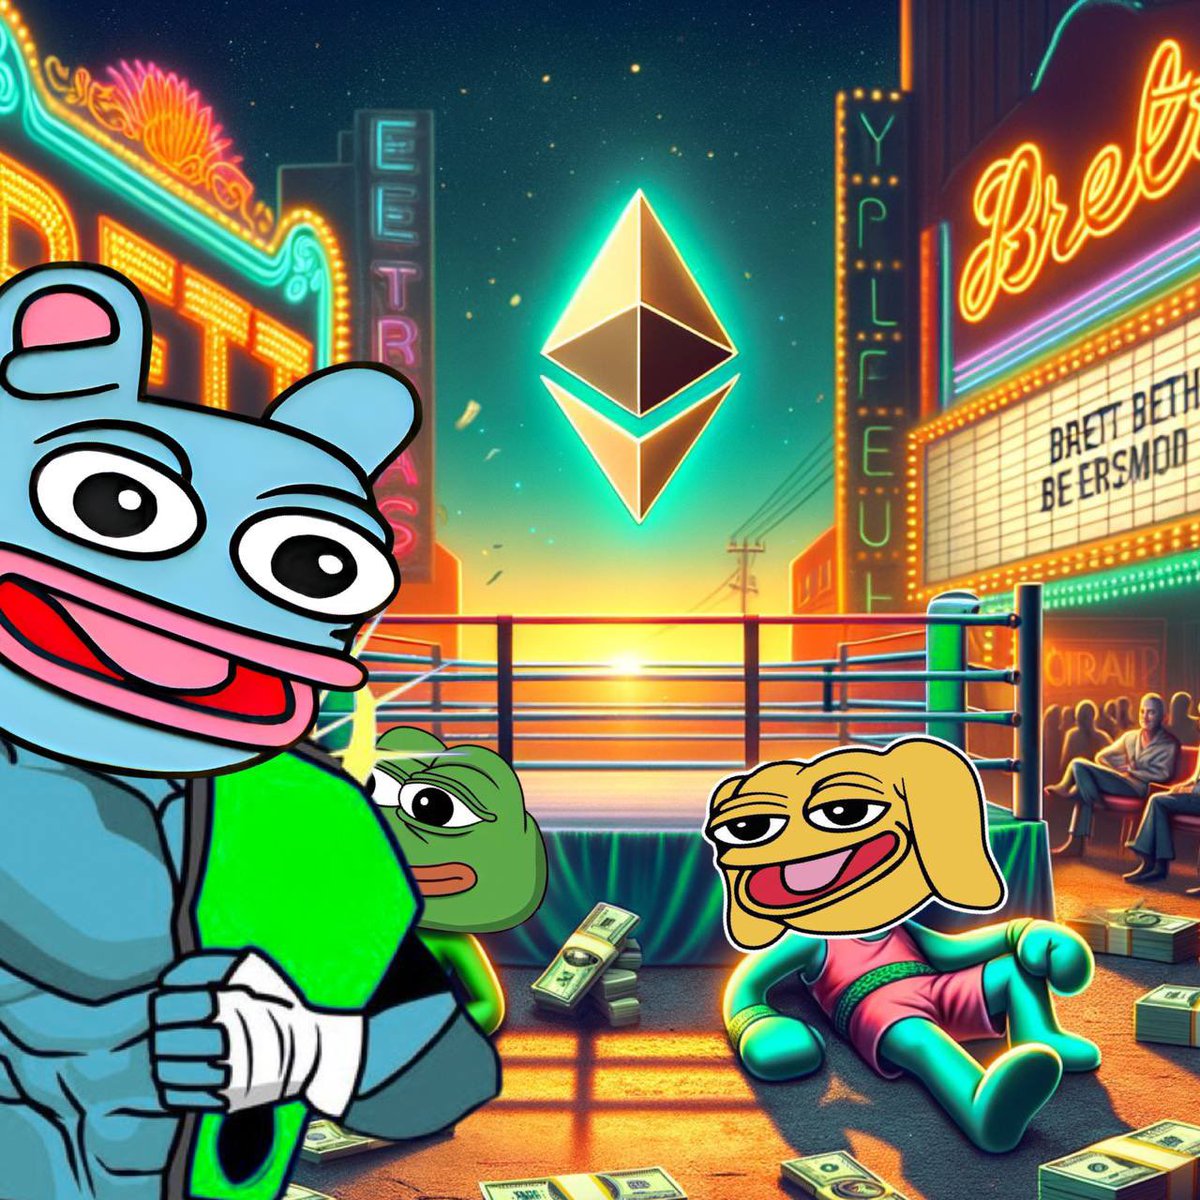 @gem_insider 🔥🔥🔥 $BRETT on $ETH 🔥🔥🔥
This is a #lowcapgem that is still early. $BRETT is destined to join his #boysclub frens $PEPE and $ANDY